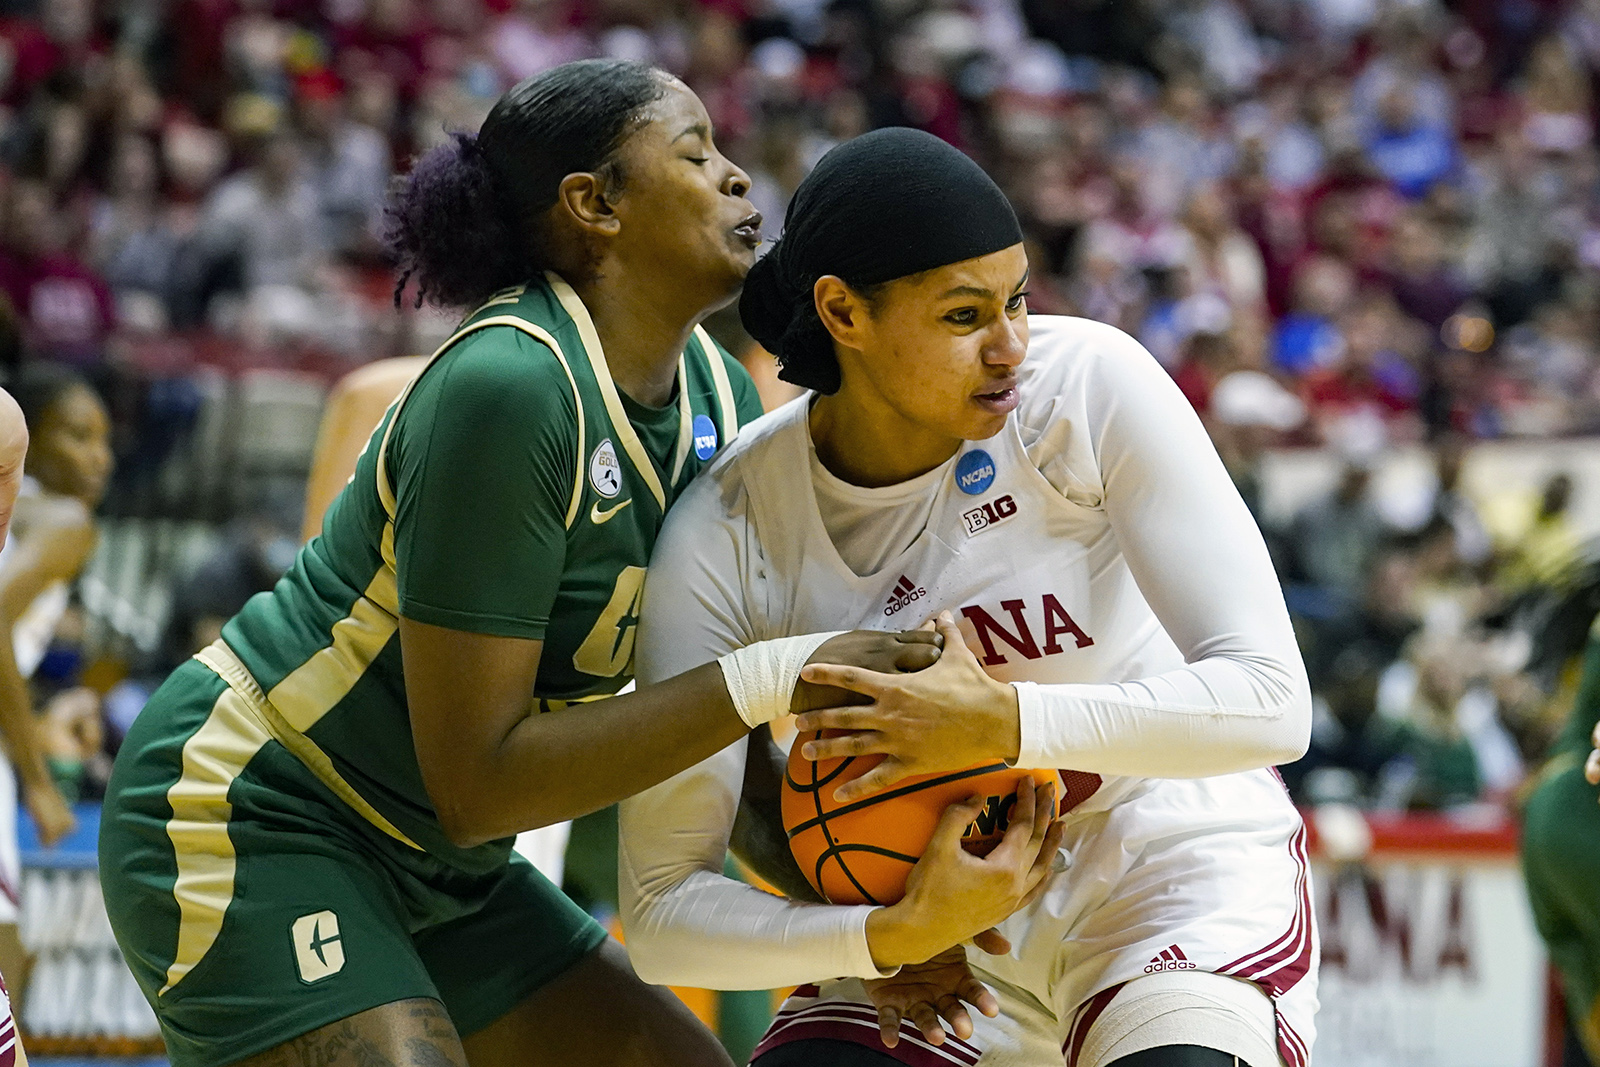 Indiana forward Kiandra Browne, right, gets tied up by Charlotte forward KeKe McKinney, left, in the first half of a college basketball game in the first round of the NCAA tournament in Bloomington, Ind., Saturday, March 19, 2022. (AP Photo/Michael Conroy)